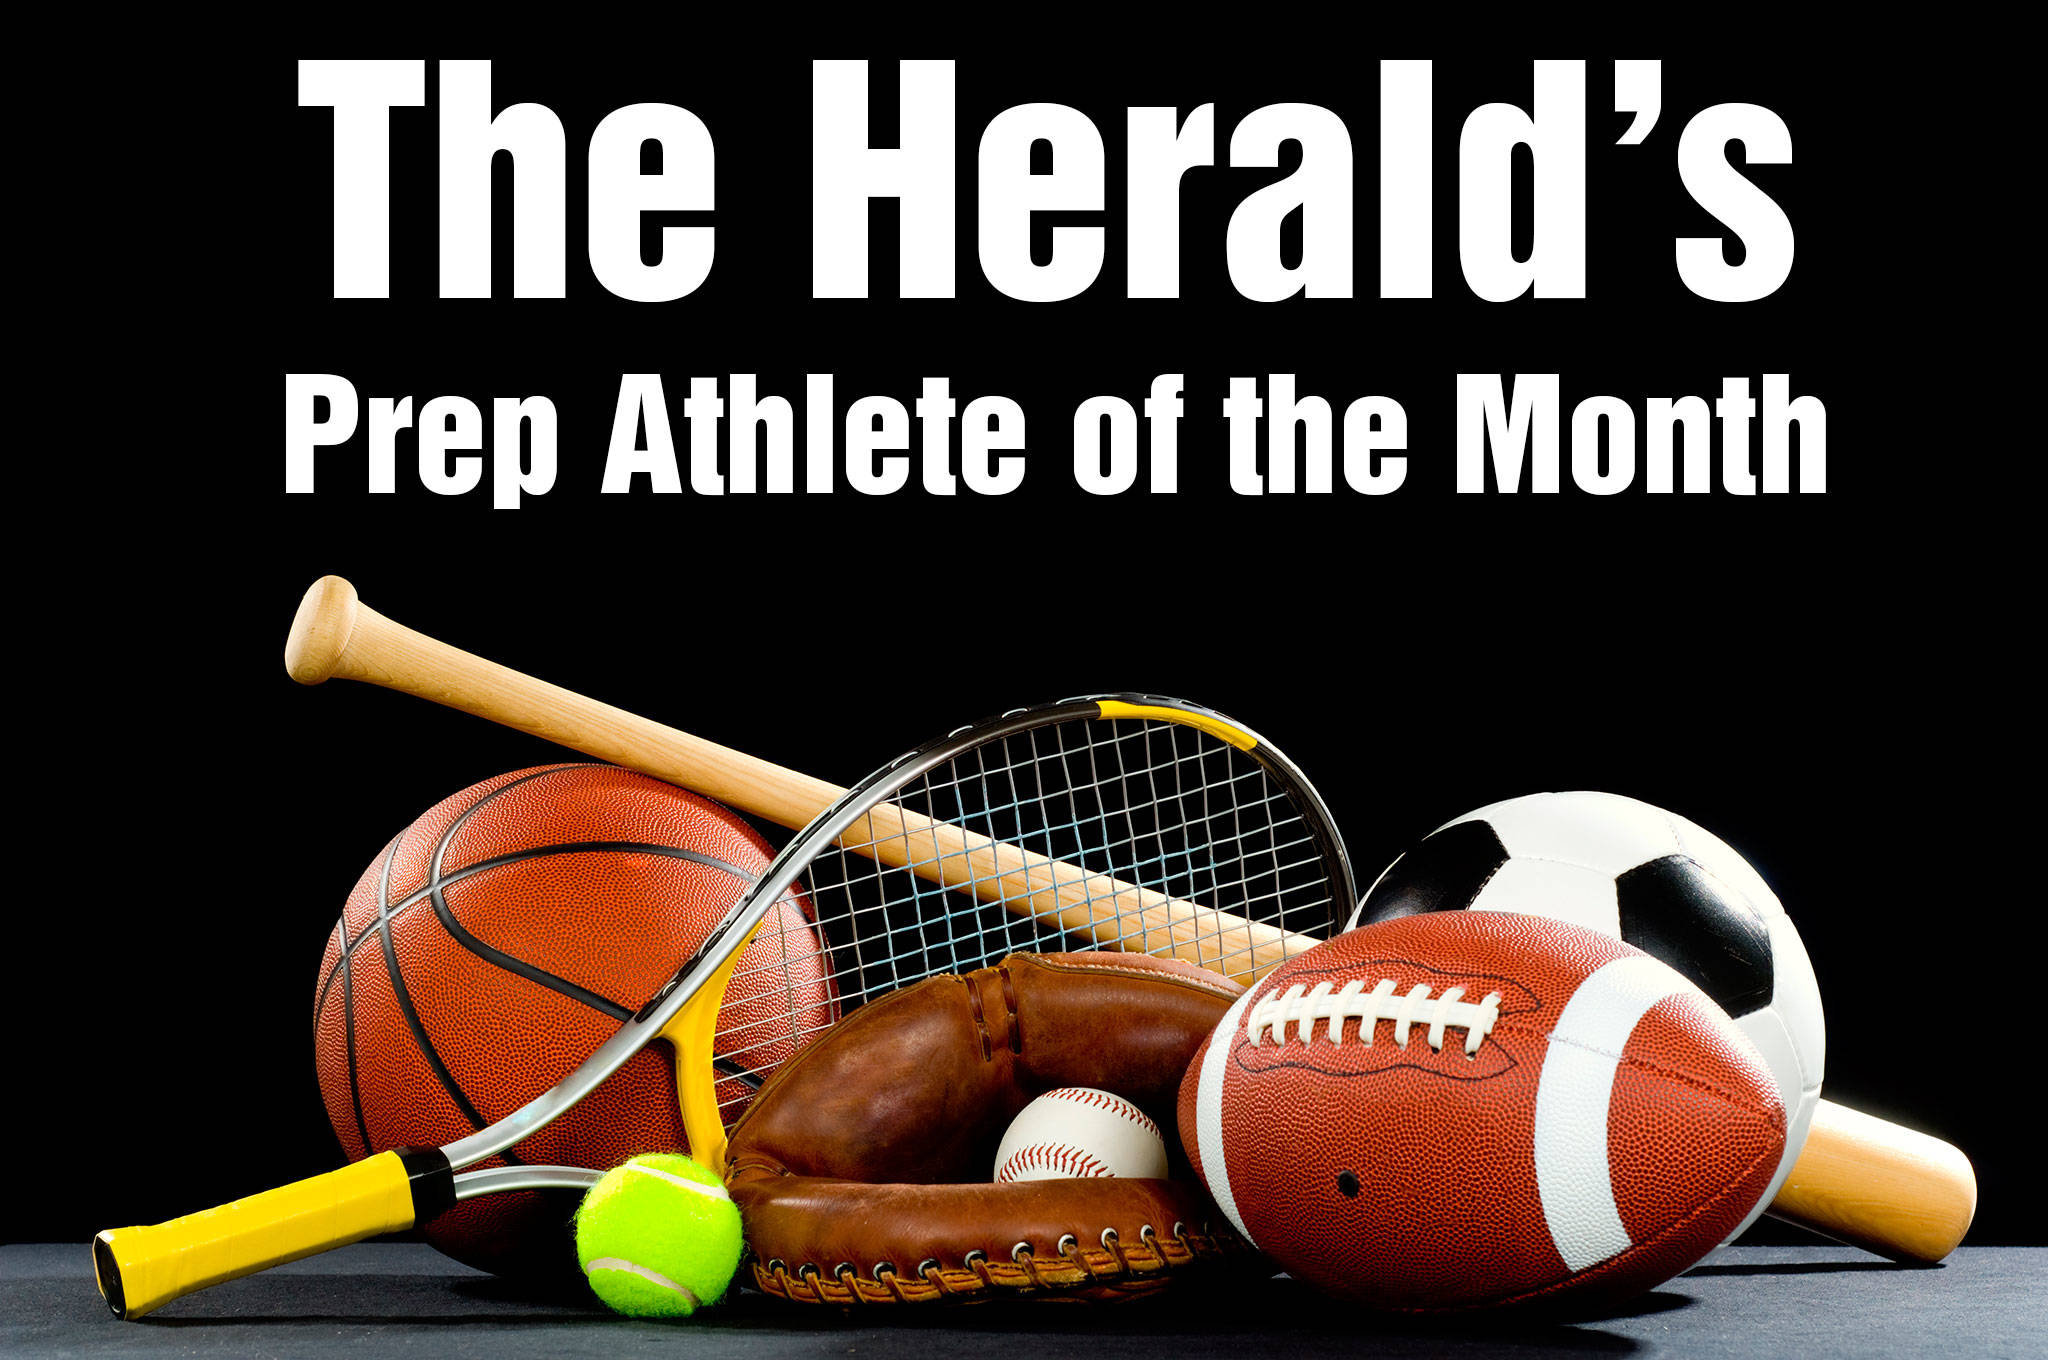 The Herald’s Prep Athlete of the Month.